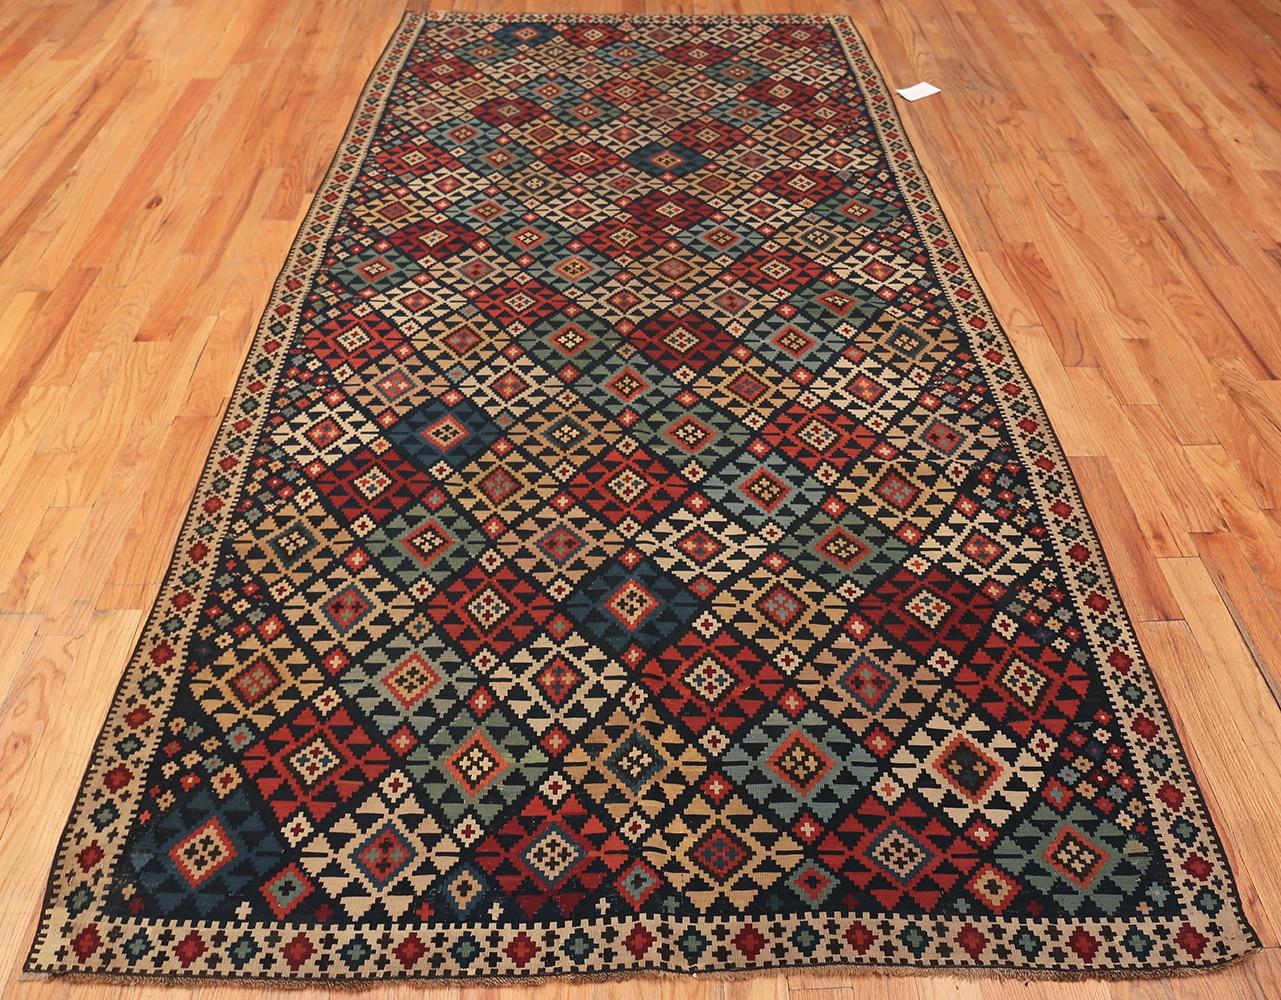 Fine Tribal Antique Caucasian Shirvan Kilim Rug, Country Of Origin / Rug Type: Caucasian Rugs, Circa Date: 1900 – This gorgeous Shirvan carpet is perfect for traditional or contemporary decor. Its geometric pattern is a perfect complement for many